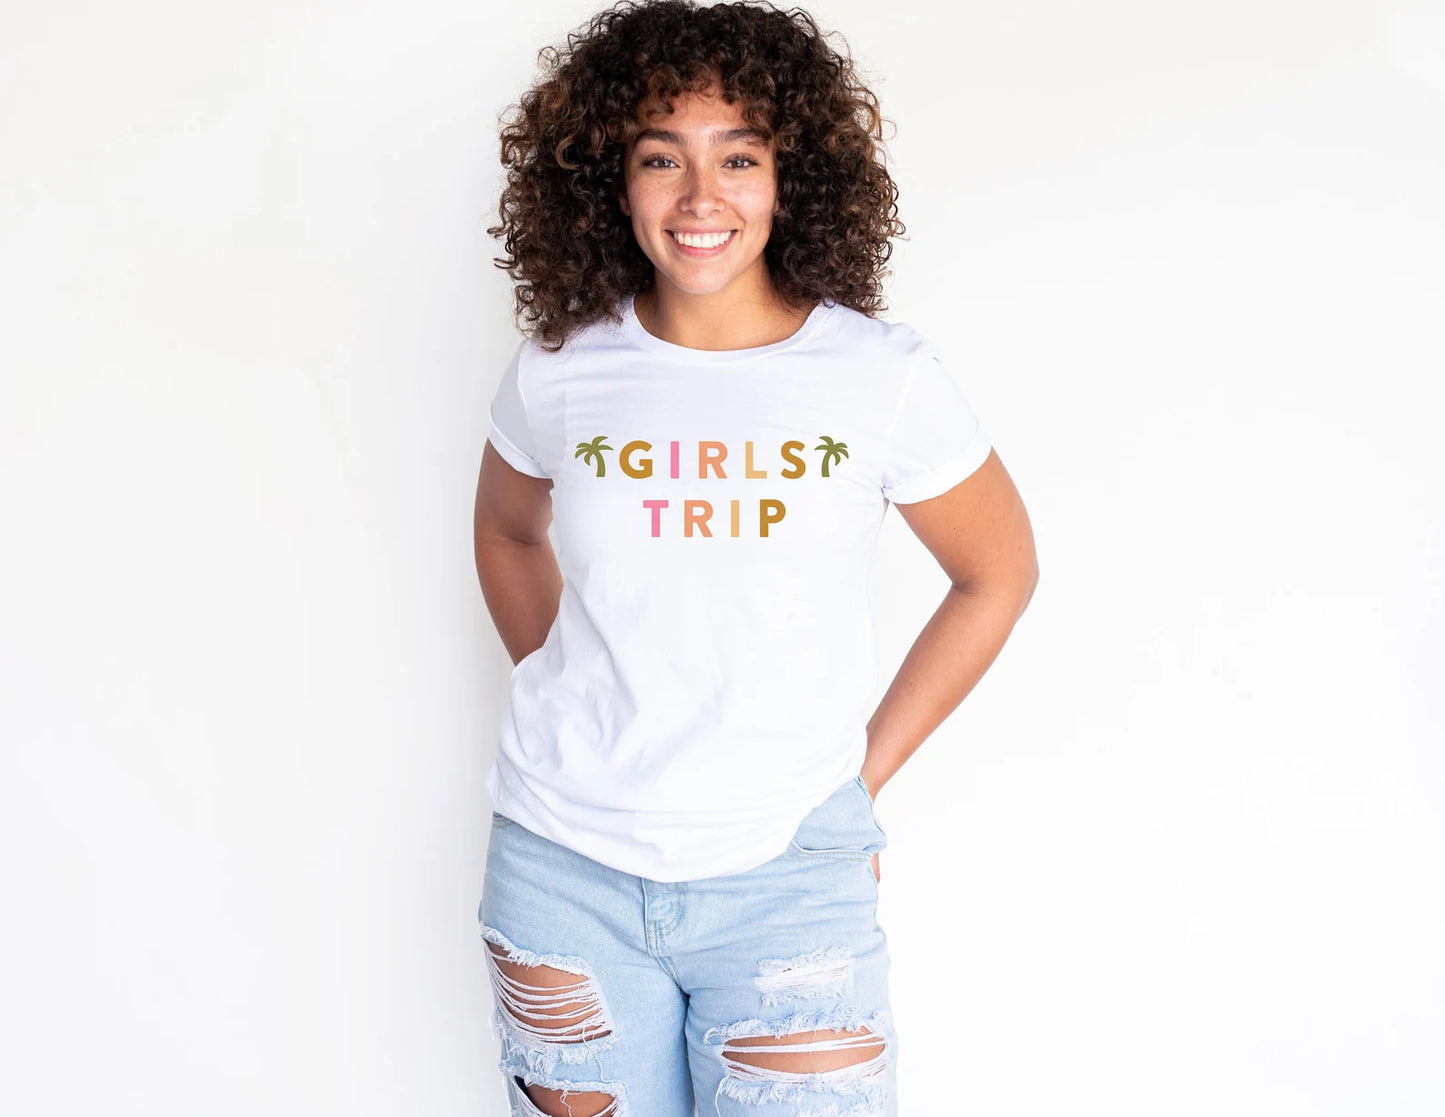 Palm Girls Trip Shirt for you and your best friends!